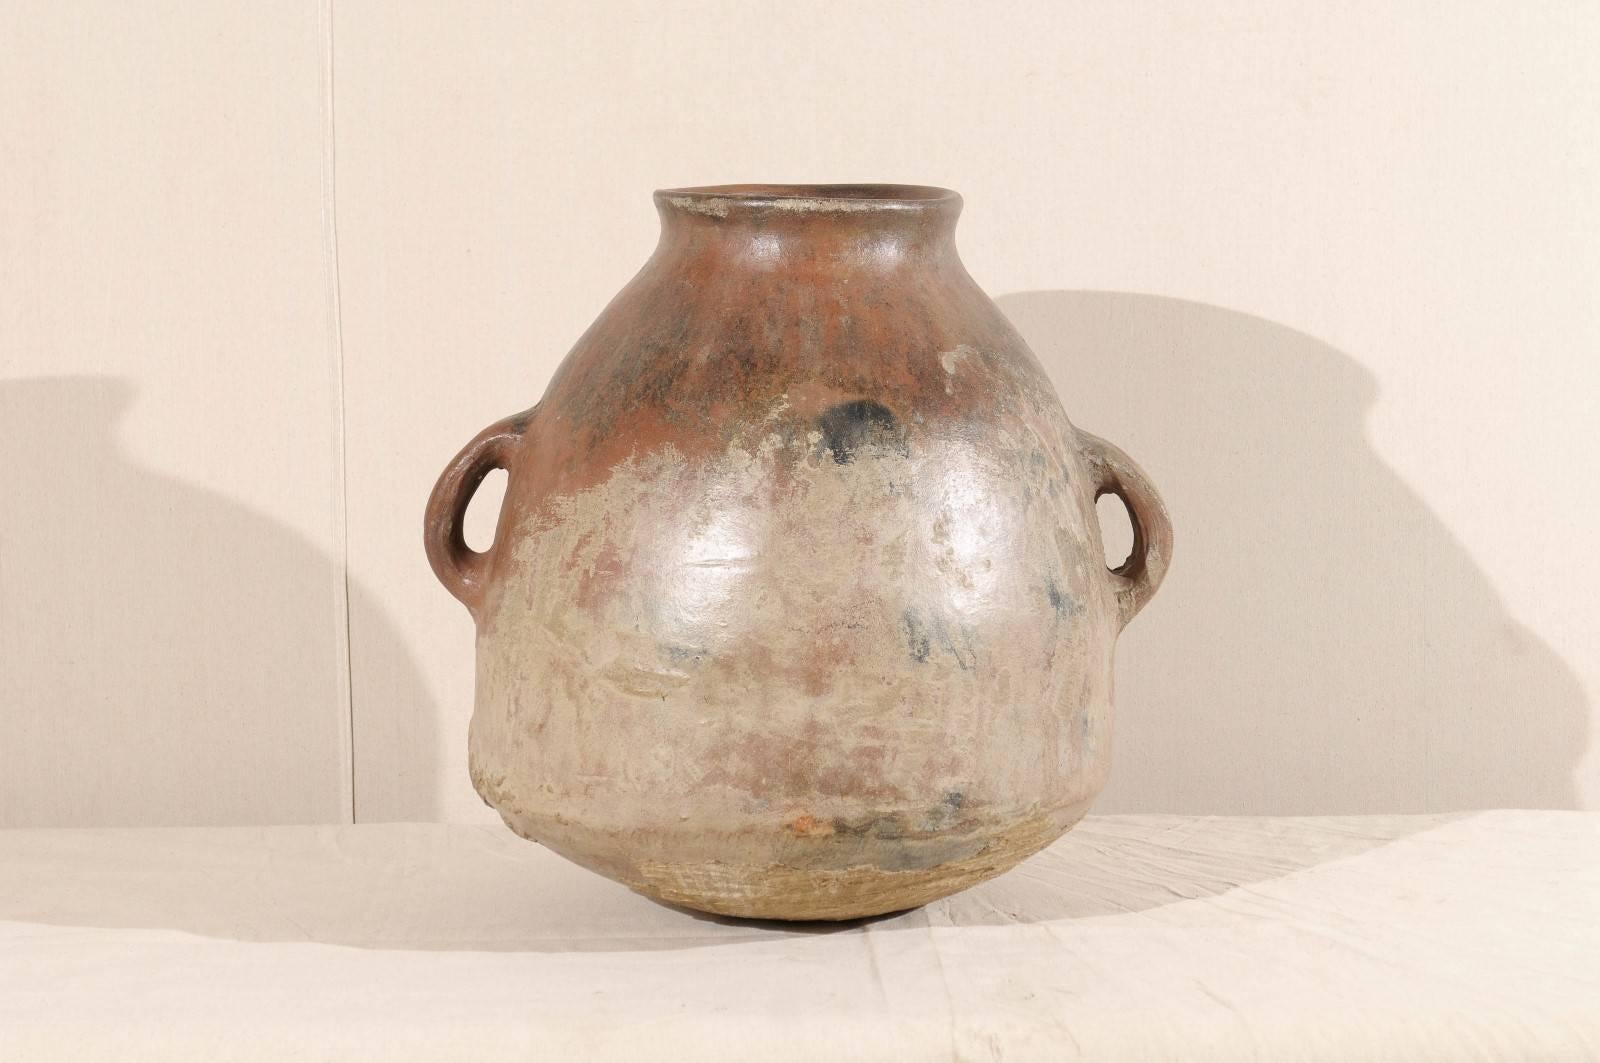 A mid-19th century Spanish Colonial jar. This two handled clay jar has a lovely aged patina, in both light and dark patches. The color is earth brown and red with lighter color on the lower part of the piece.  This piece would look perfect perched